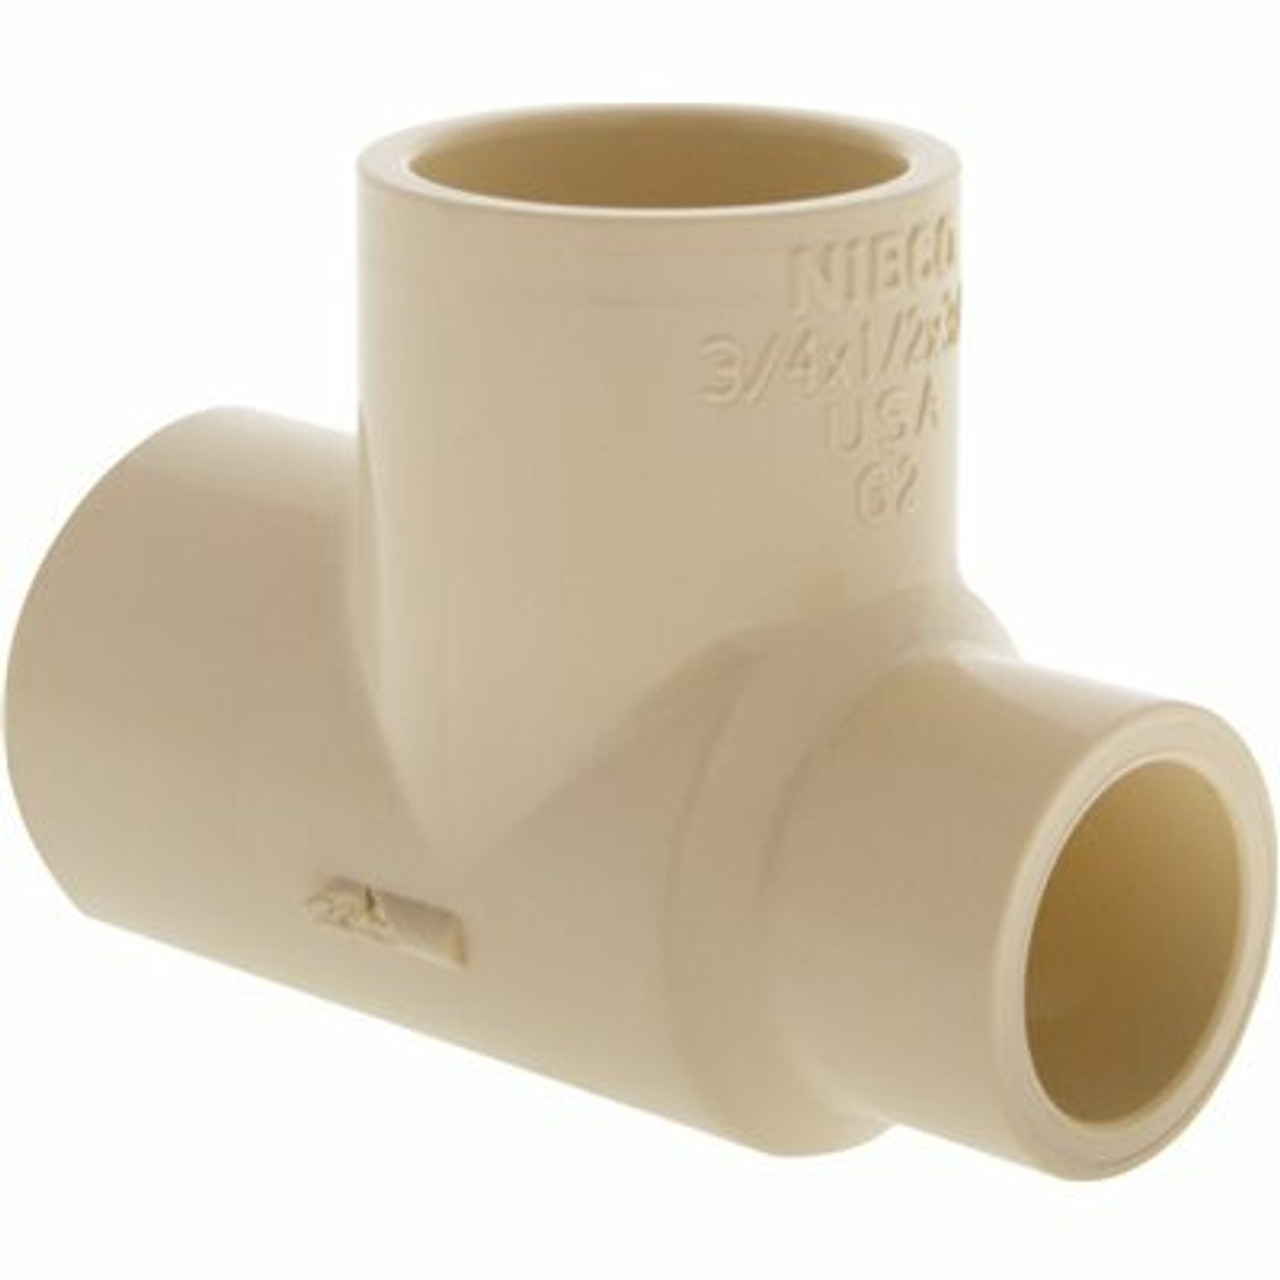 Everbilt 3/4 In. X 1/2 In. X 3/4 In. Cpvc-Cts All Slip Reducing Tee Fitting